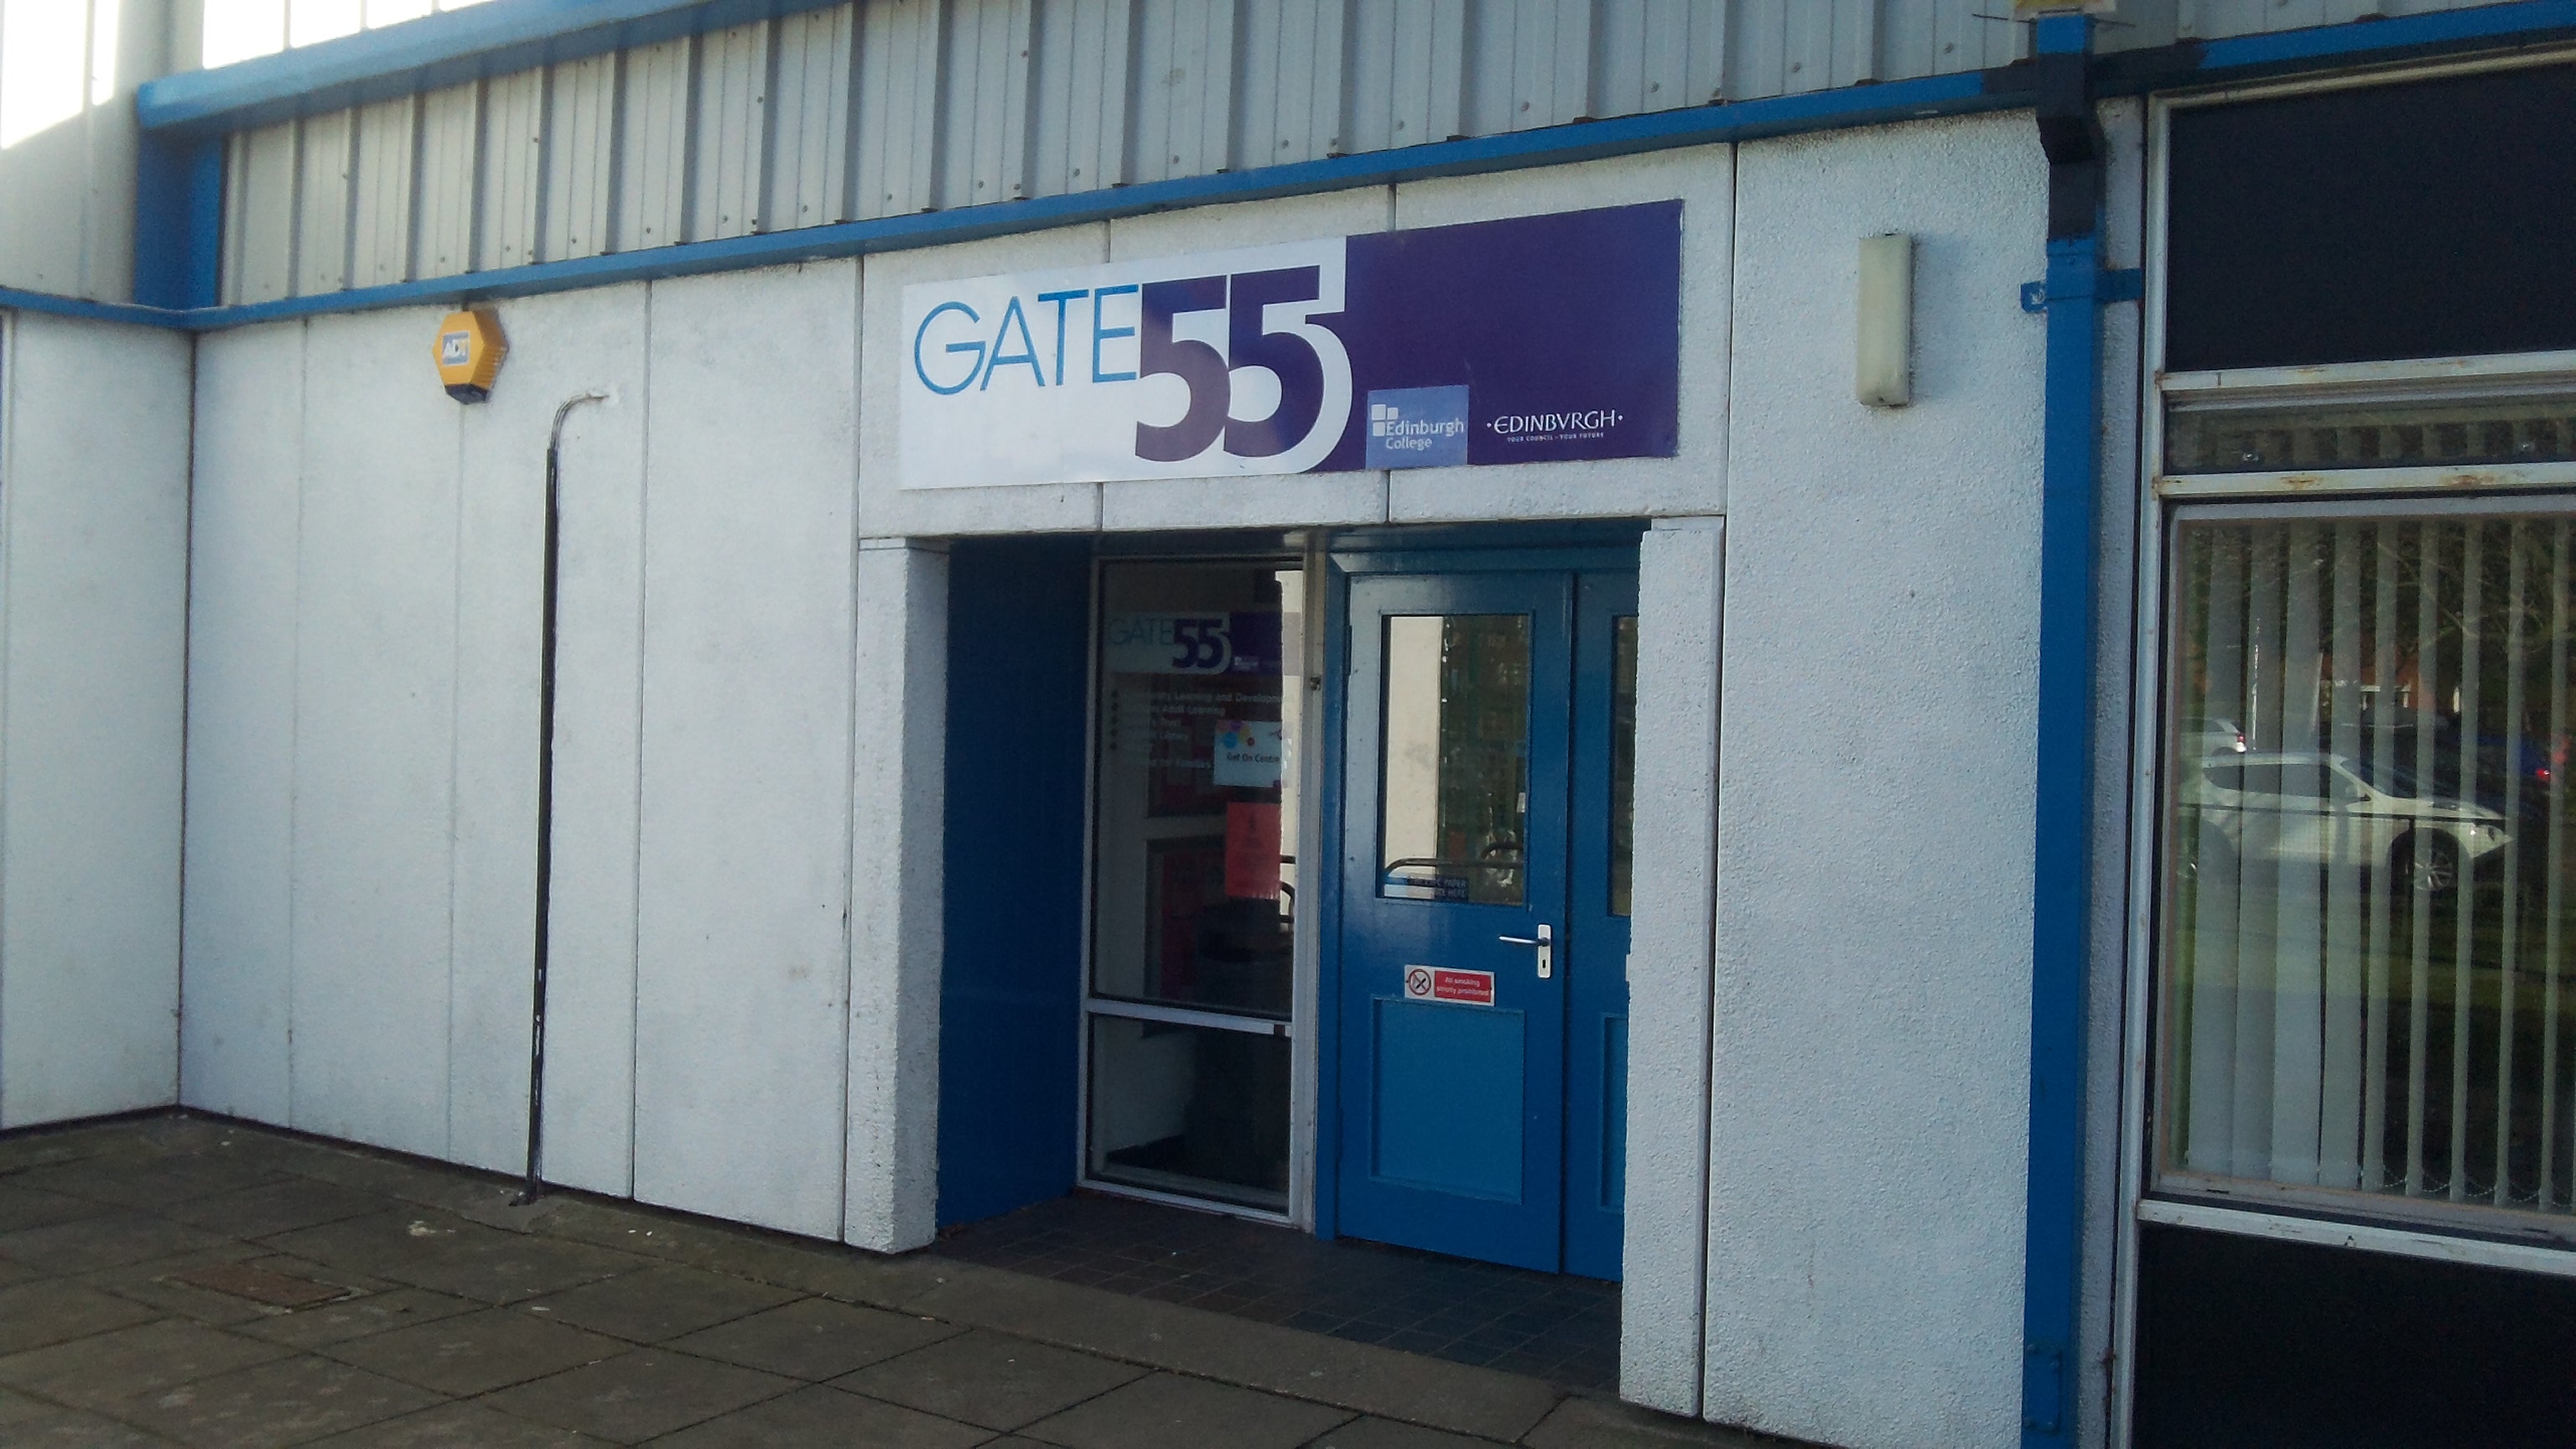 Sighthill Library/Gate 55 Featured Image